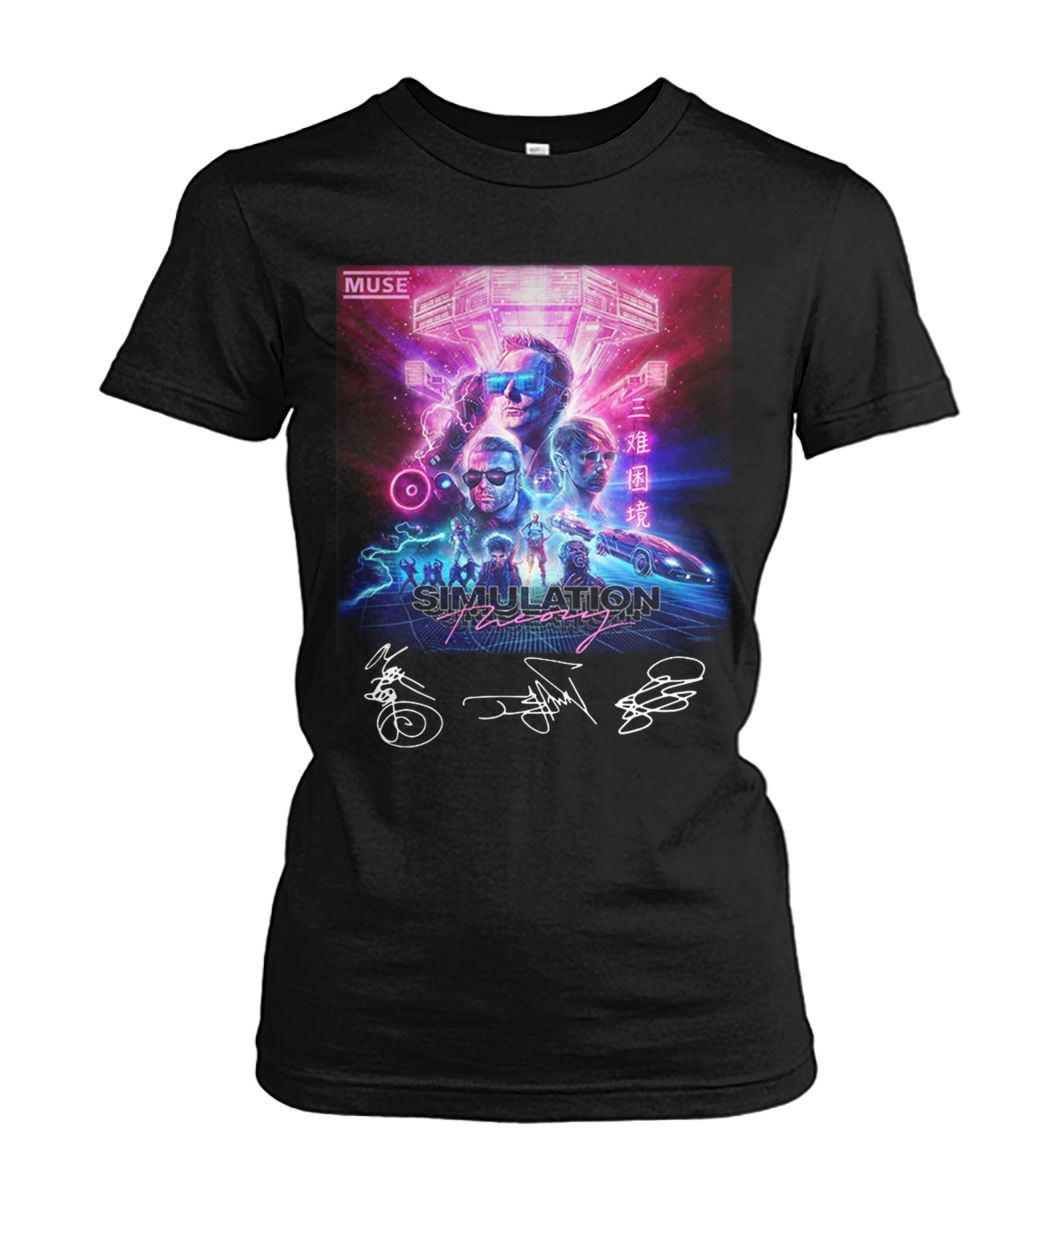 Muse simulation theory signatures women's crew tee